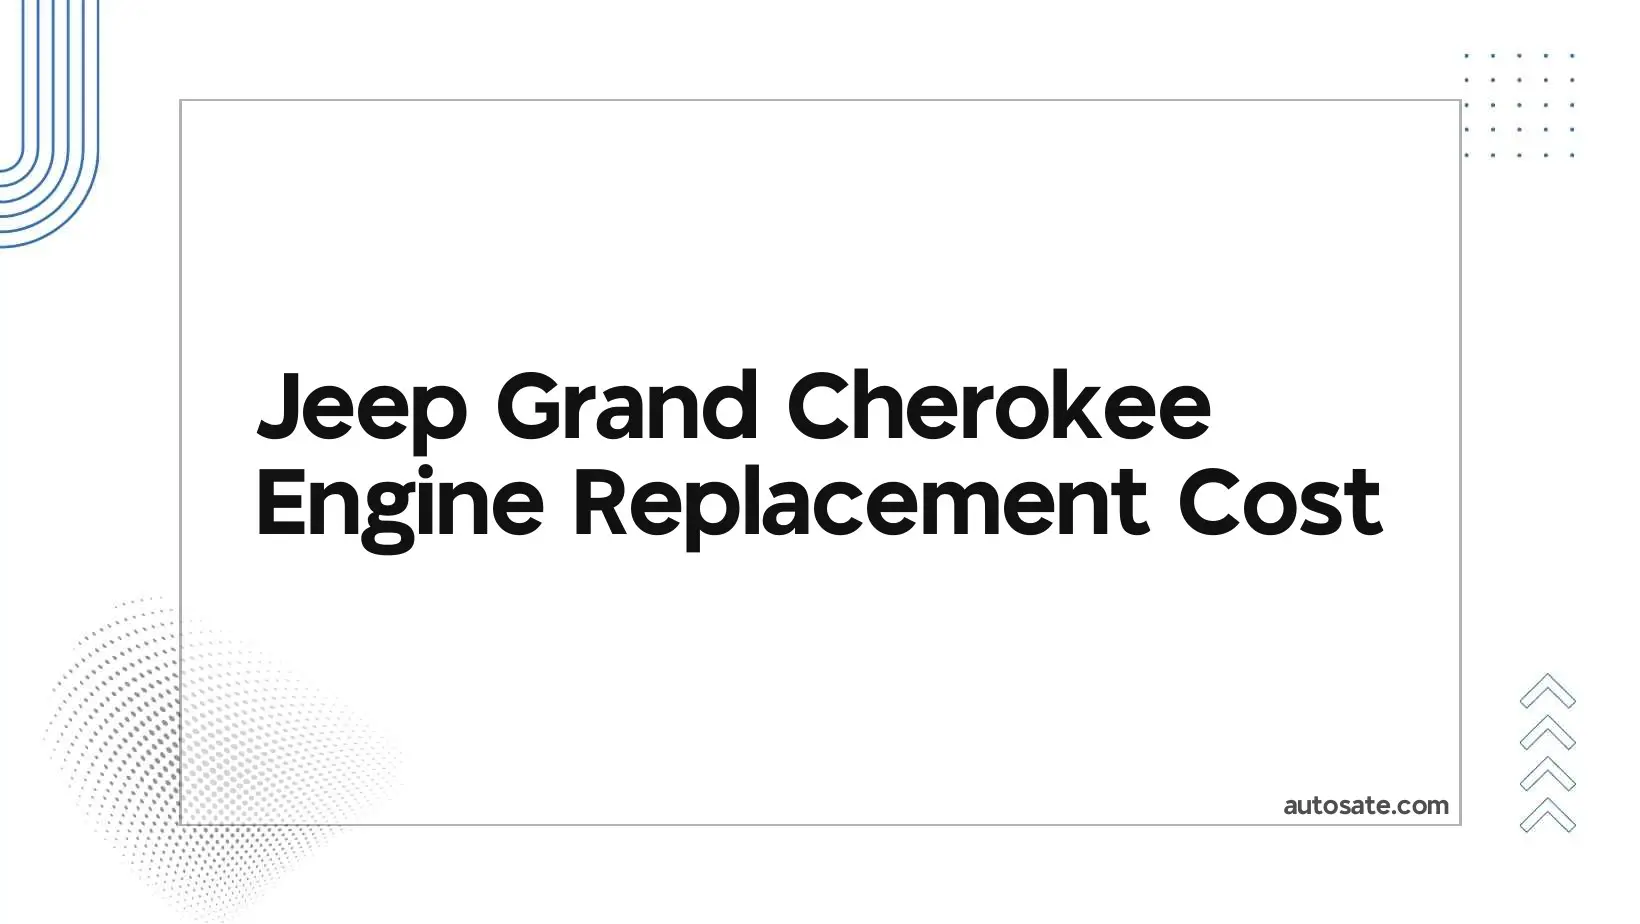 Jeep Grand Cherokee Engine Replacement Cost